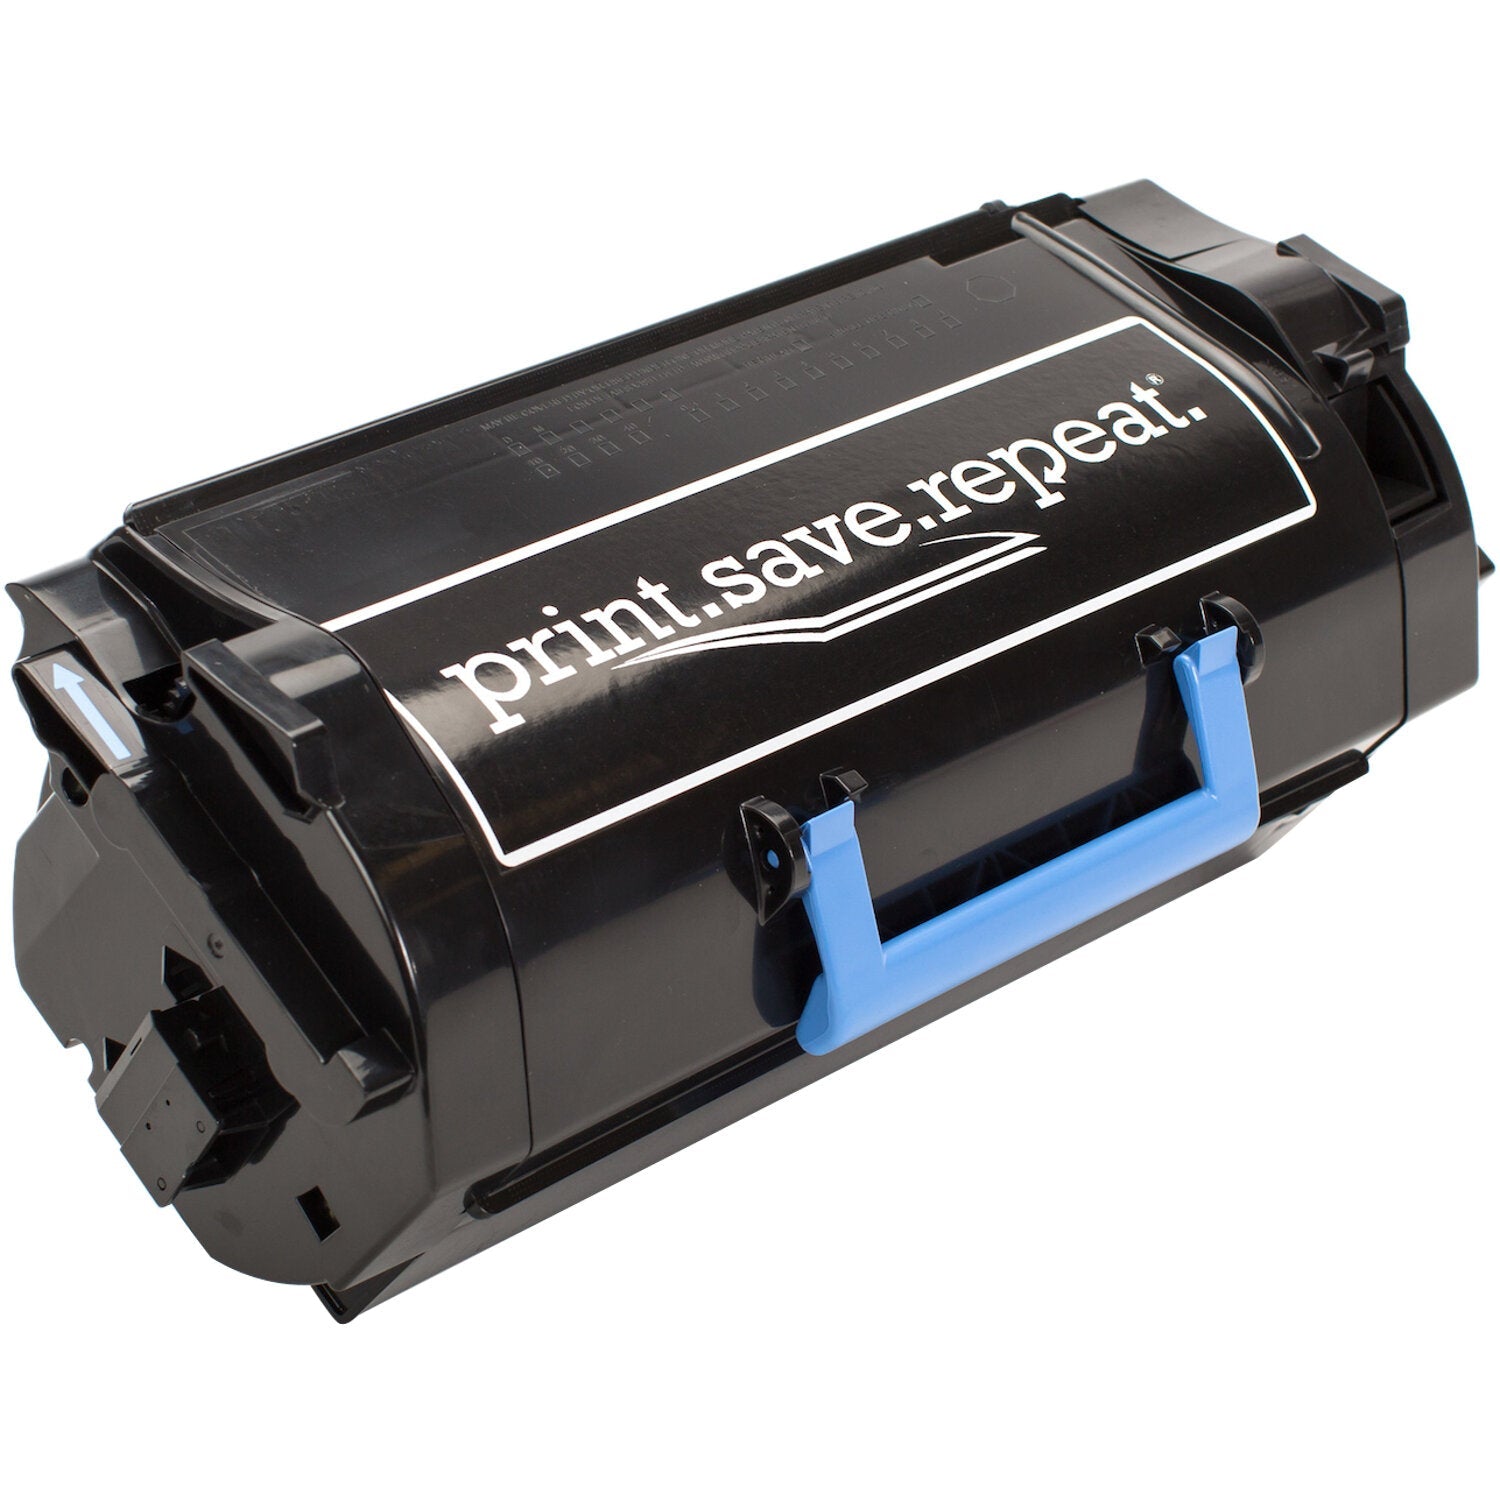 Print.Save.Repeat. Dell 8XTXR Extra High Yield Remanufactured Toner Cartridge for S5830 [45,000 Pages]